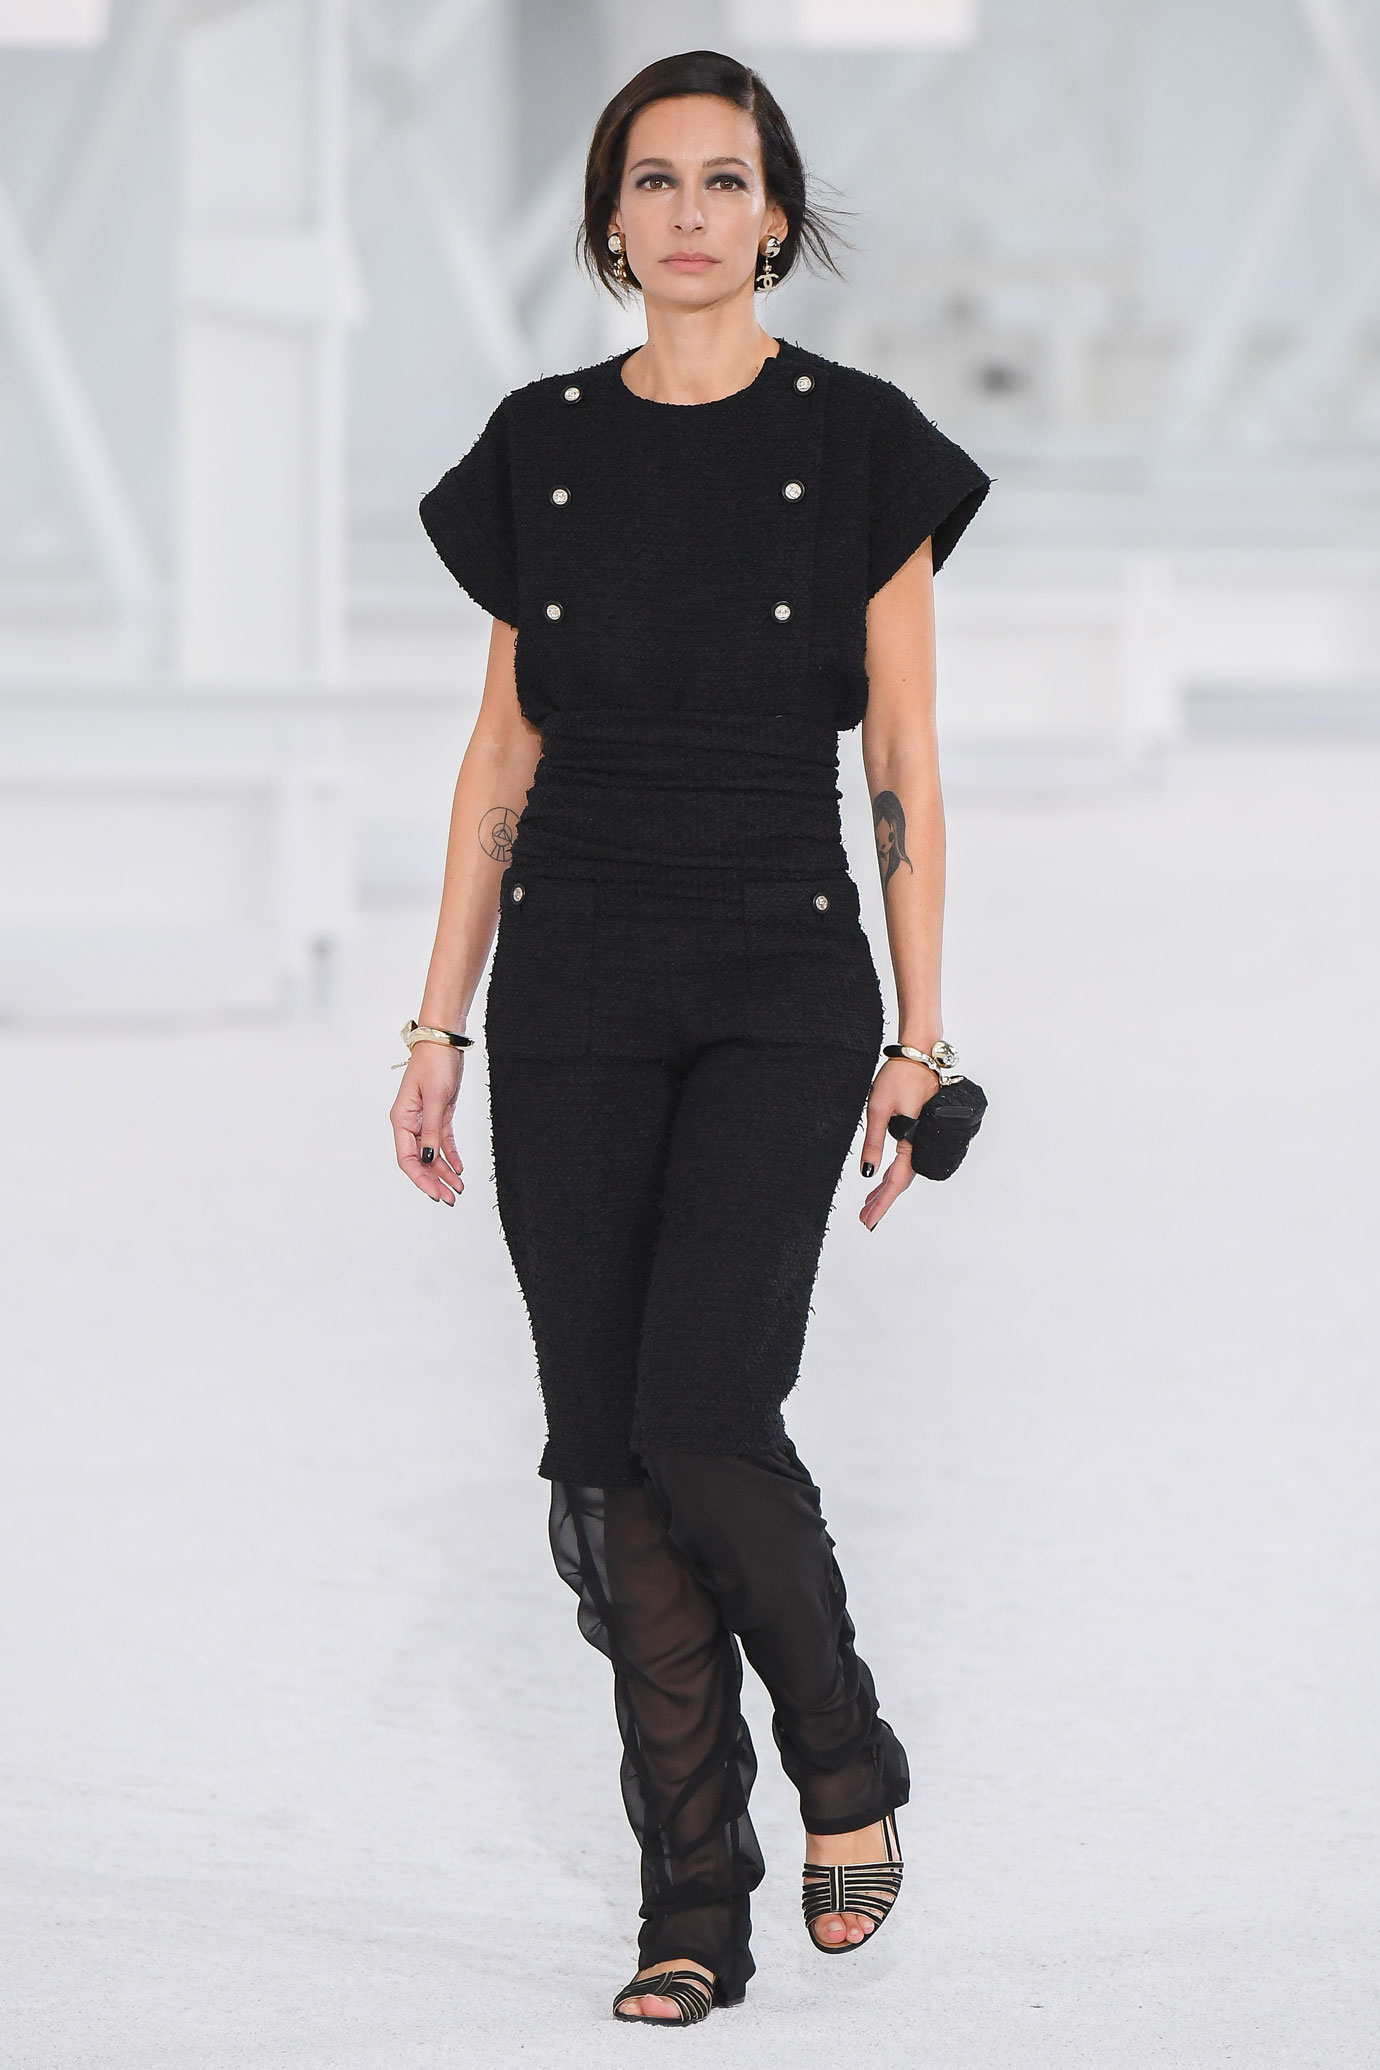 Model on the Chanel catwalk wearing all black during the women's Spring/Summer 2020/2021 collection show.